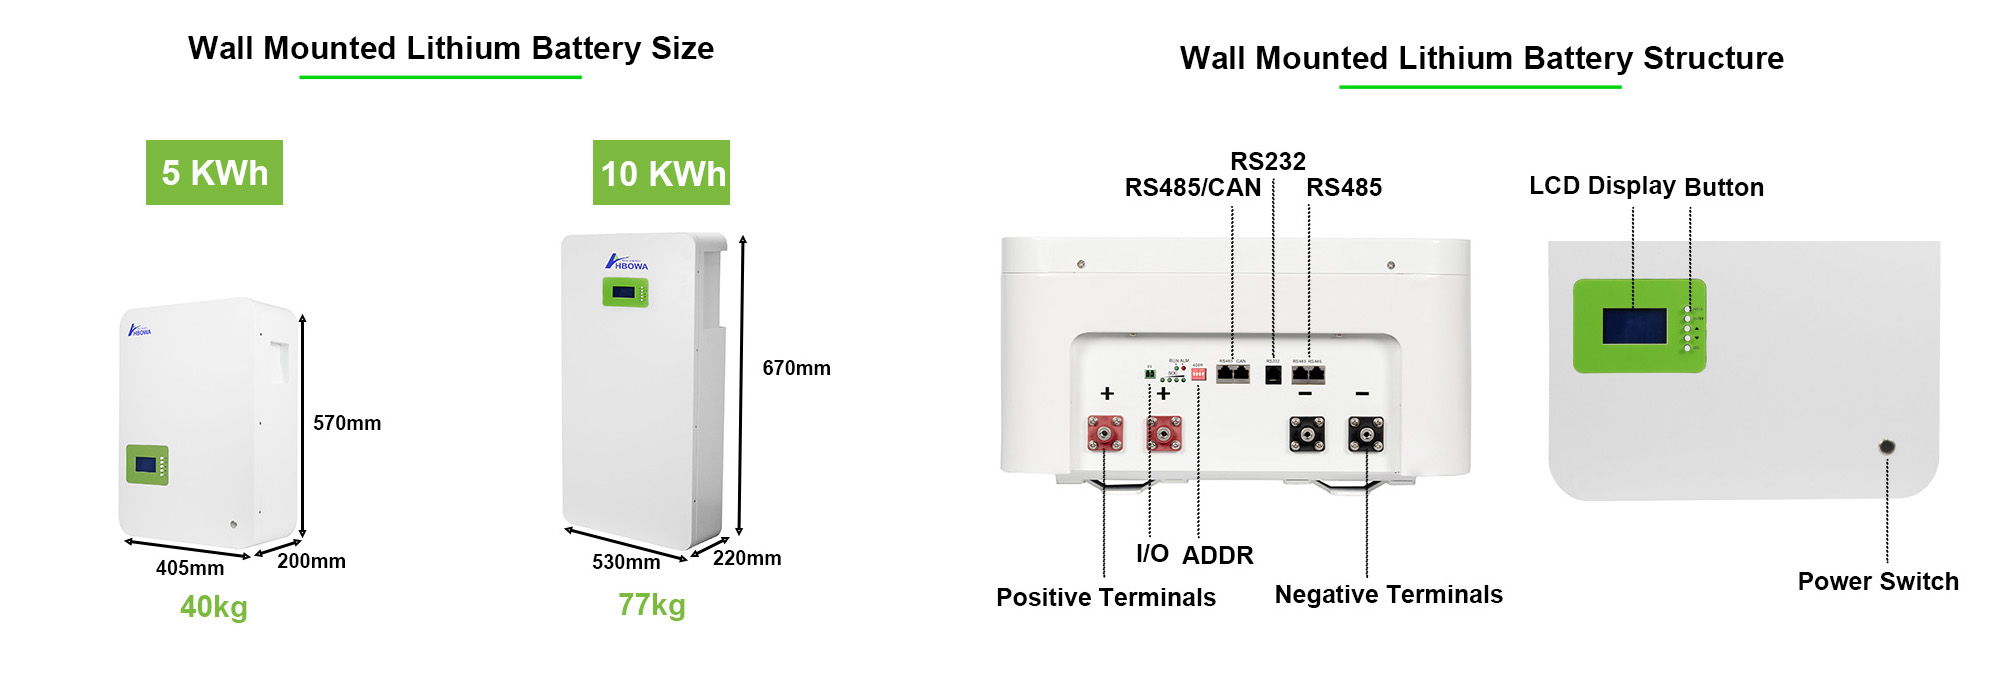 Powerwall lithium battery dimension and structure